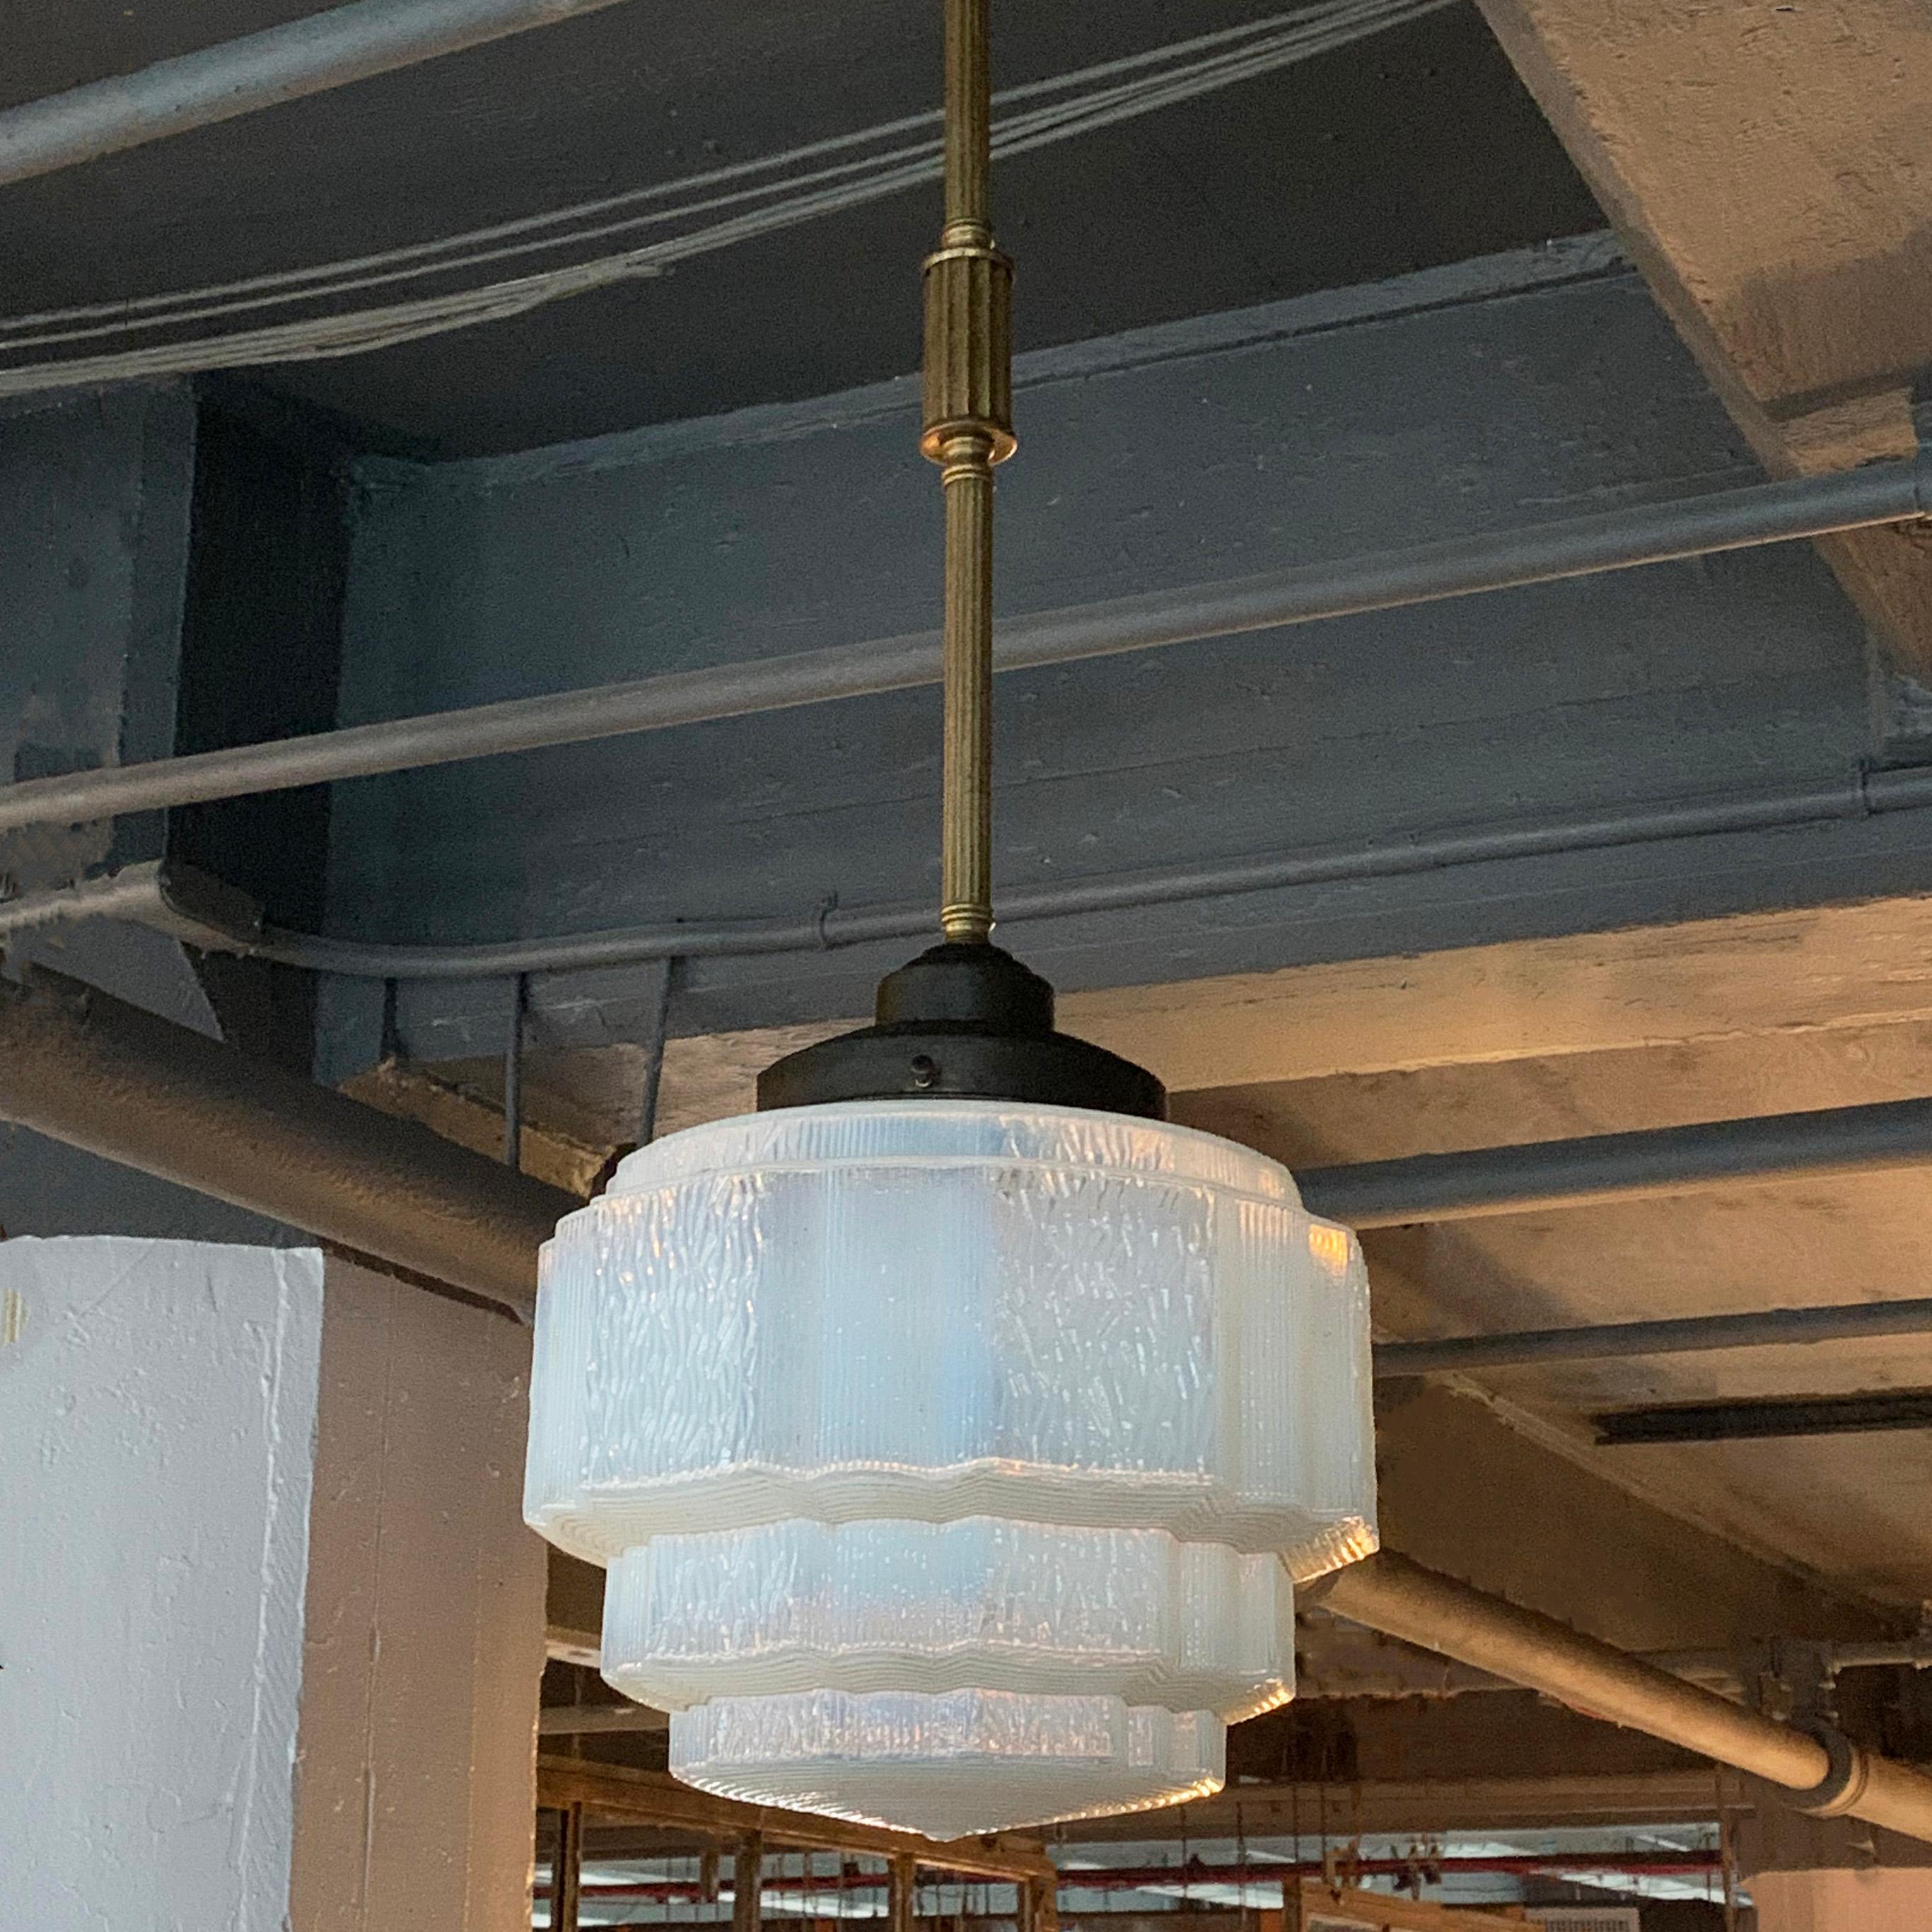 Art Deco pendant light features a layer cake, ribbed pattern opaline glass shade on a decorative, steel and brass pole with canopy. The pendant is newly wired to accept up to a 200 watt medium socket bulb. The shade measures 12 diameter x 9 height.